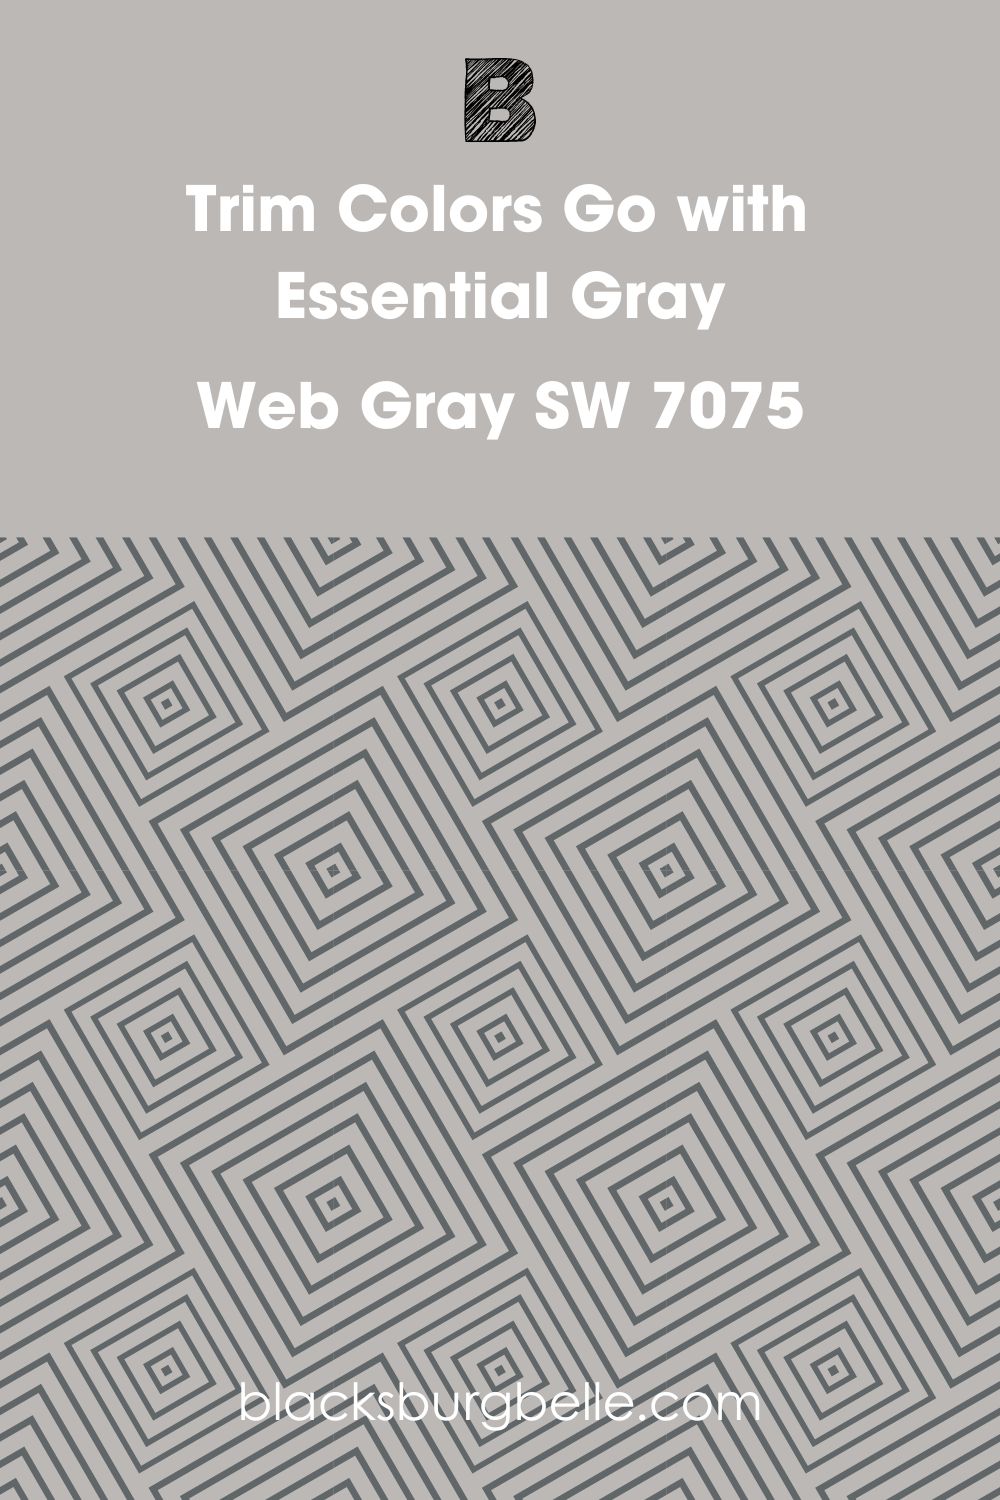 Web Gray SW 7075 Go with Sherwin Williams Essential Gray